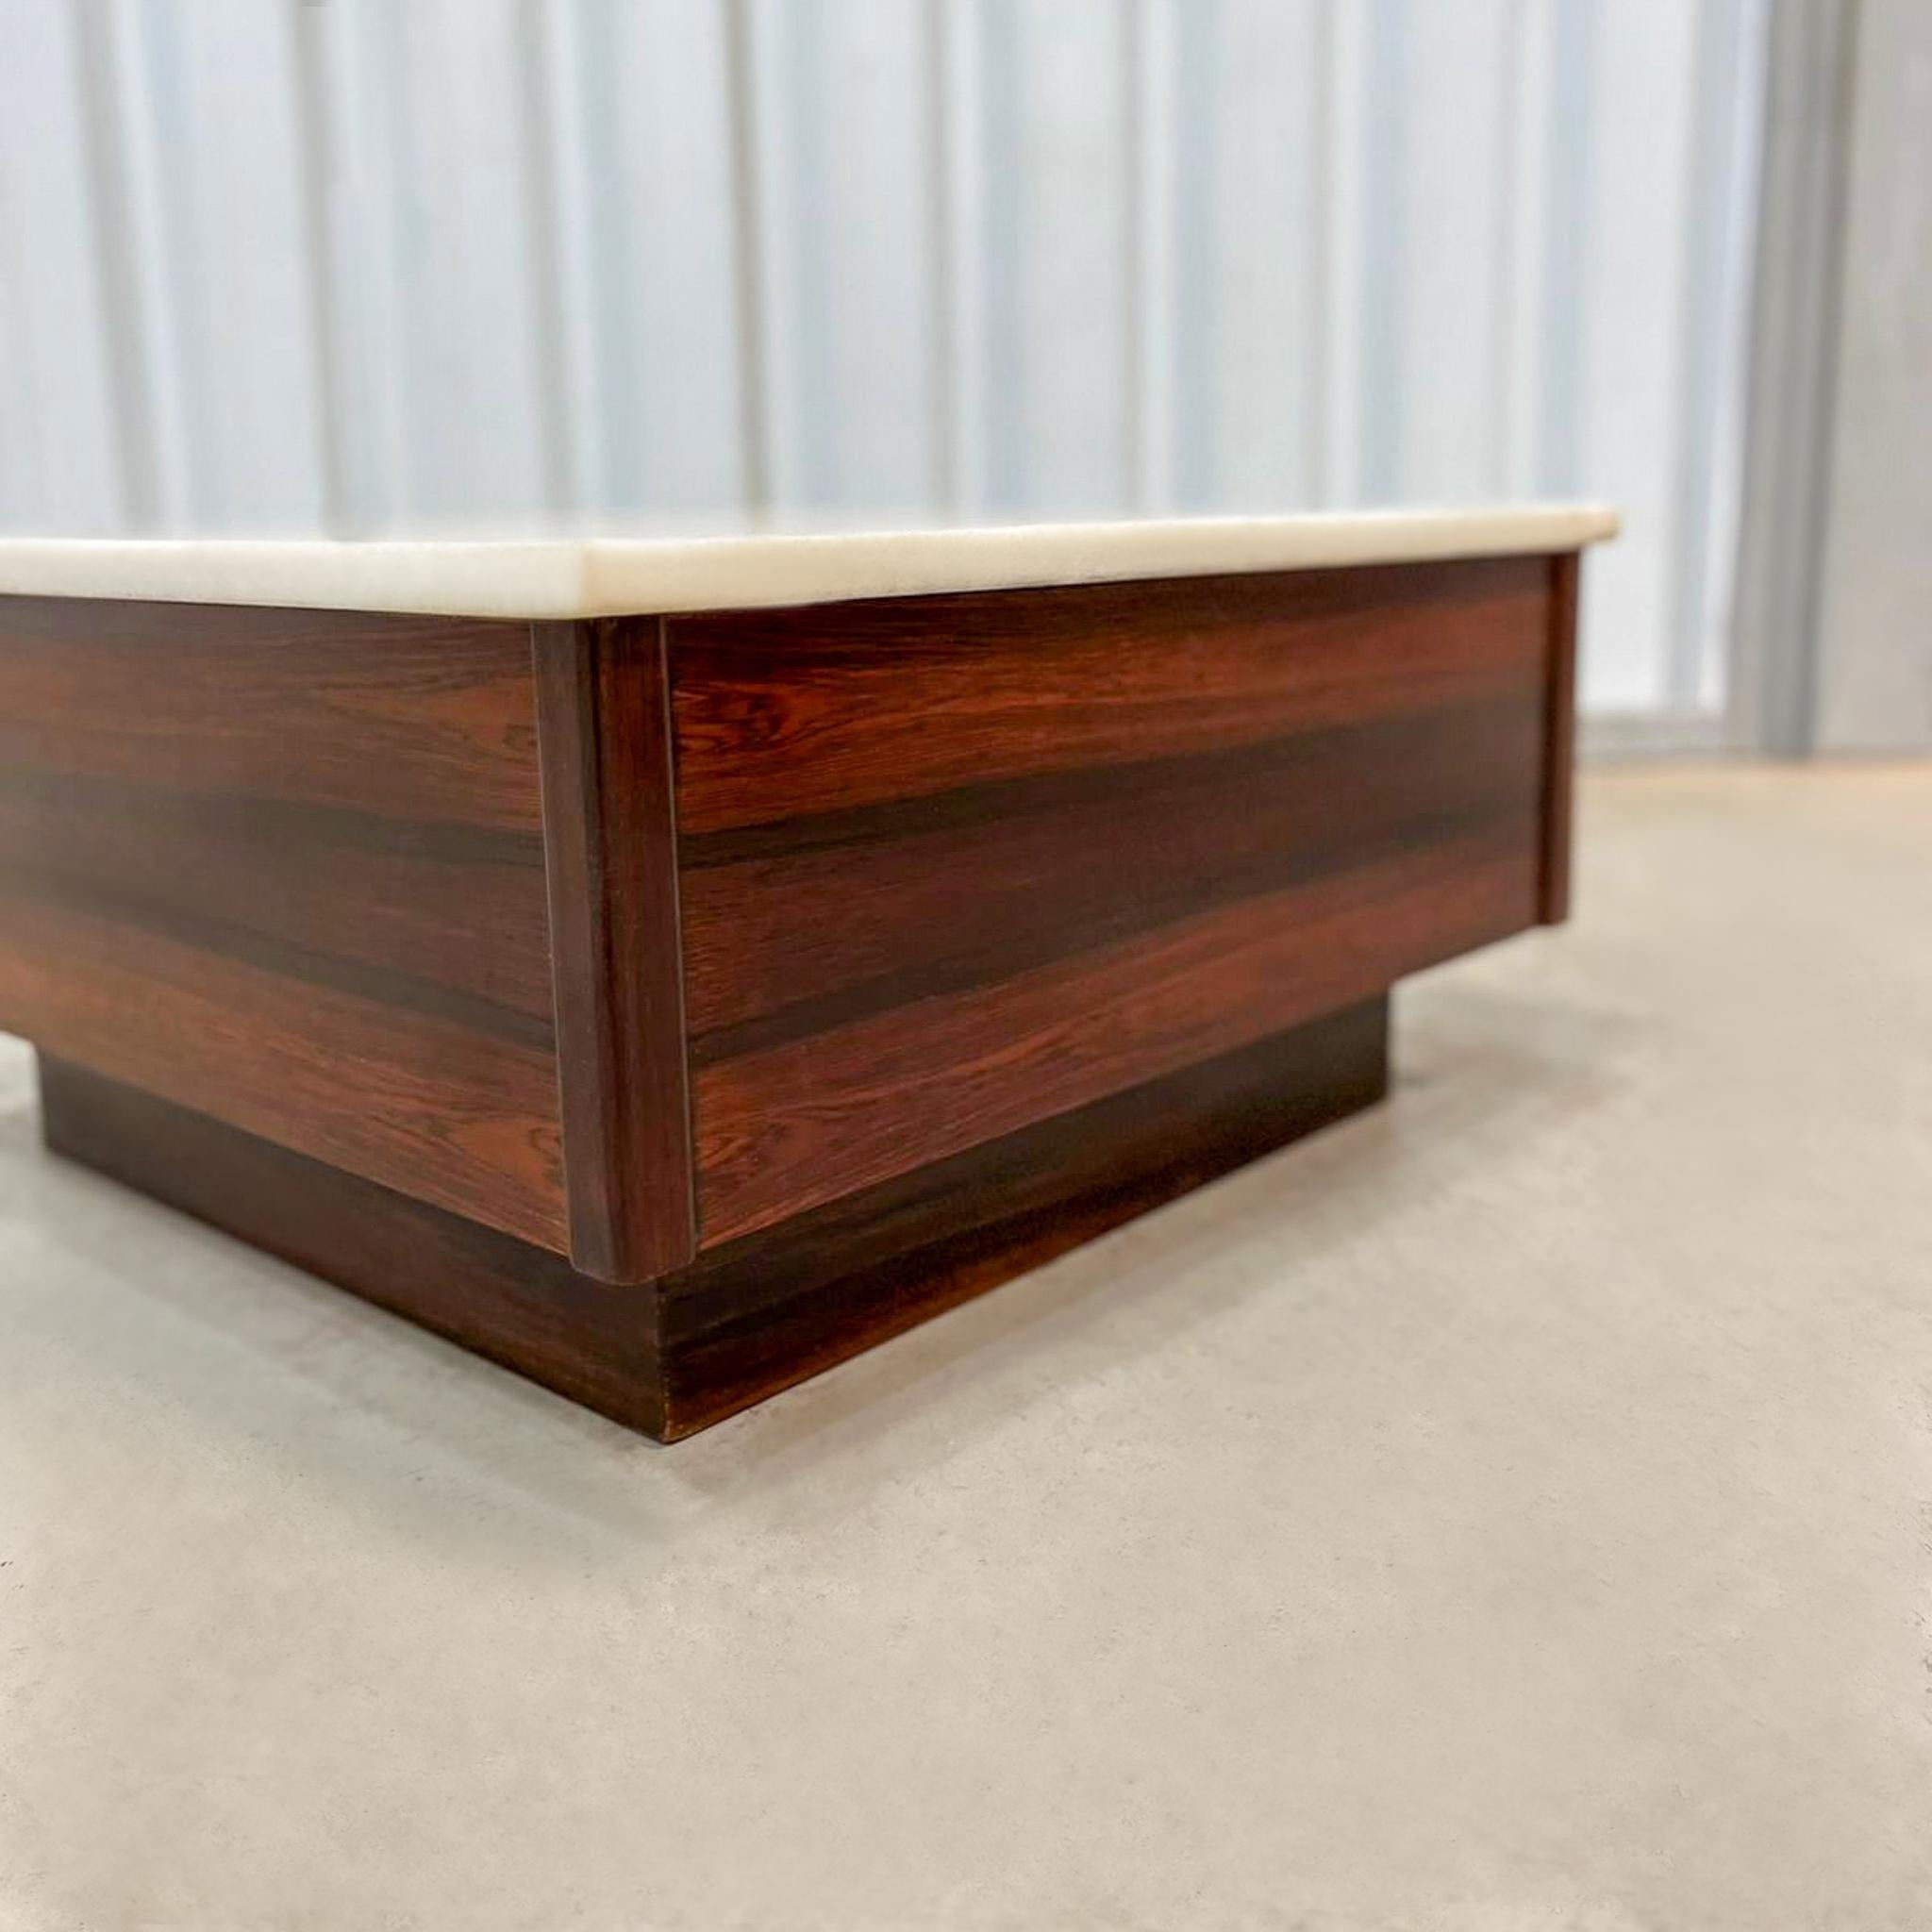 Brazilian Modern Coffee Table in Hardwood & Marble Top, Unknown, c. 1960 For Sale 2